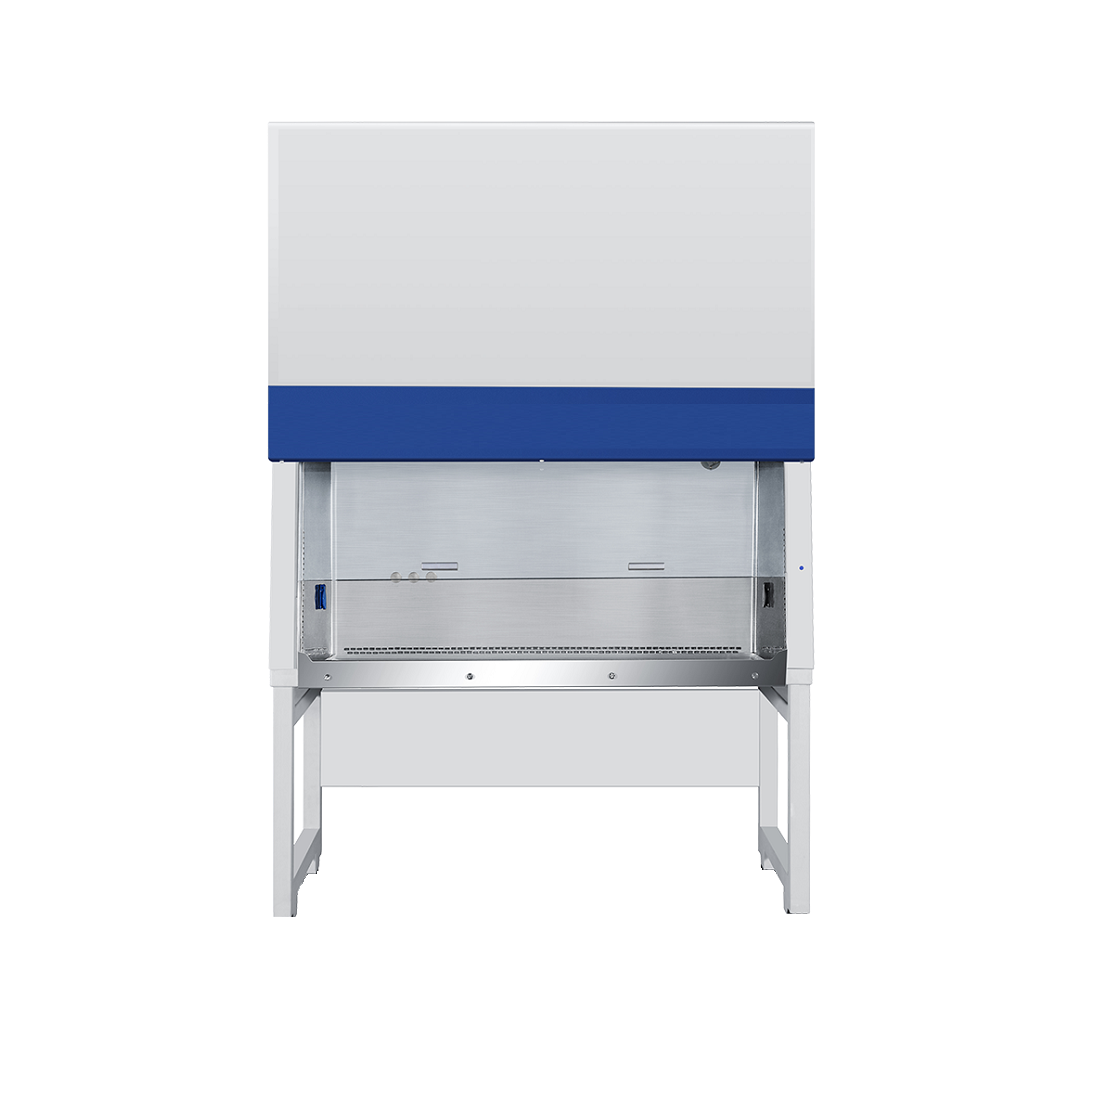 Bio-Safety Cabinet (Class II Type A2)